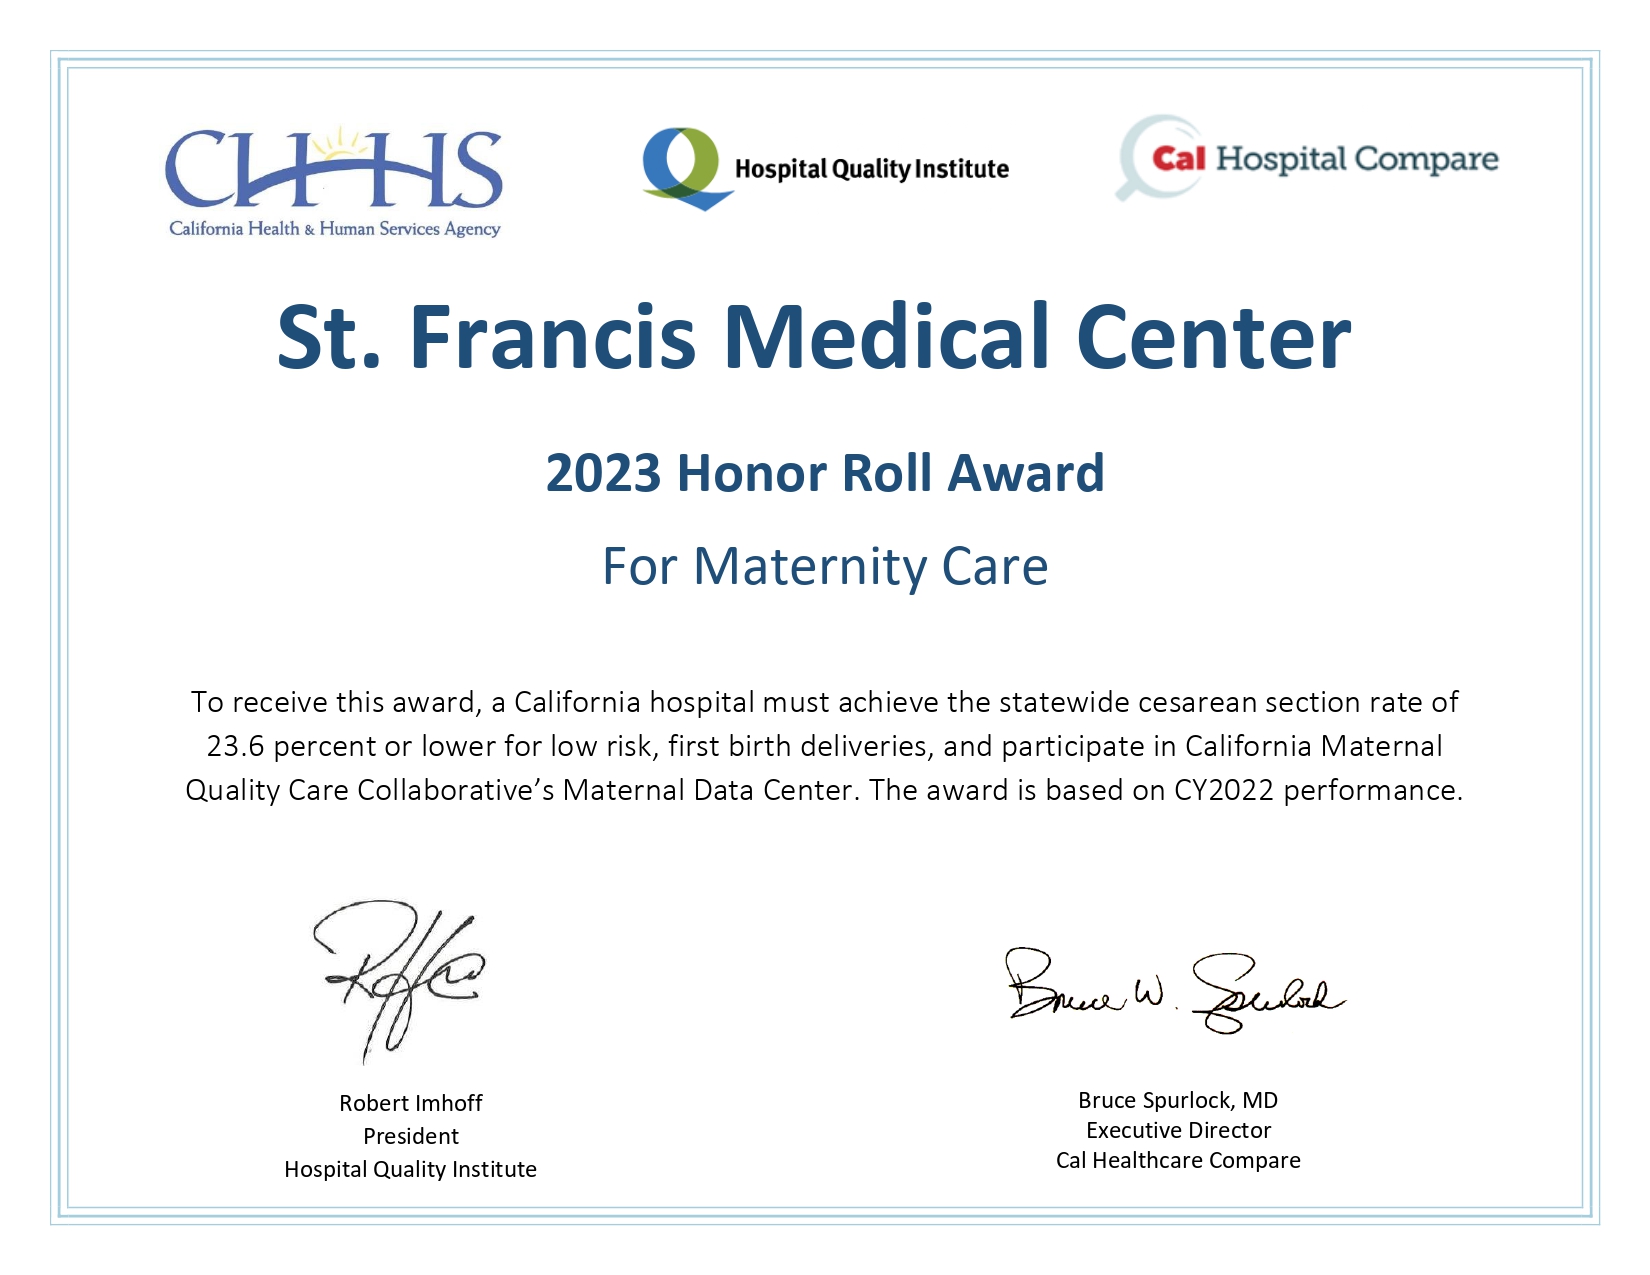 Certificate_Maternity Honor Roll_2023 - St. Francis Medical Center